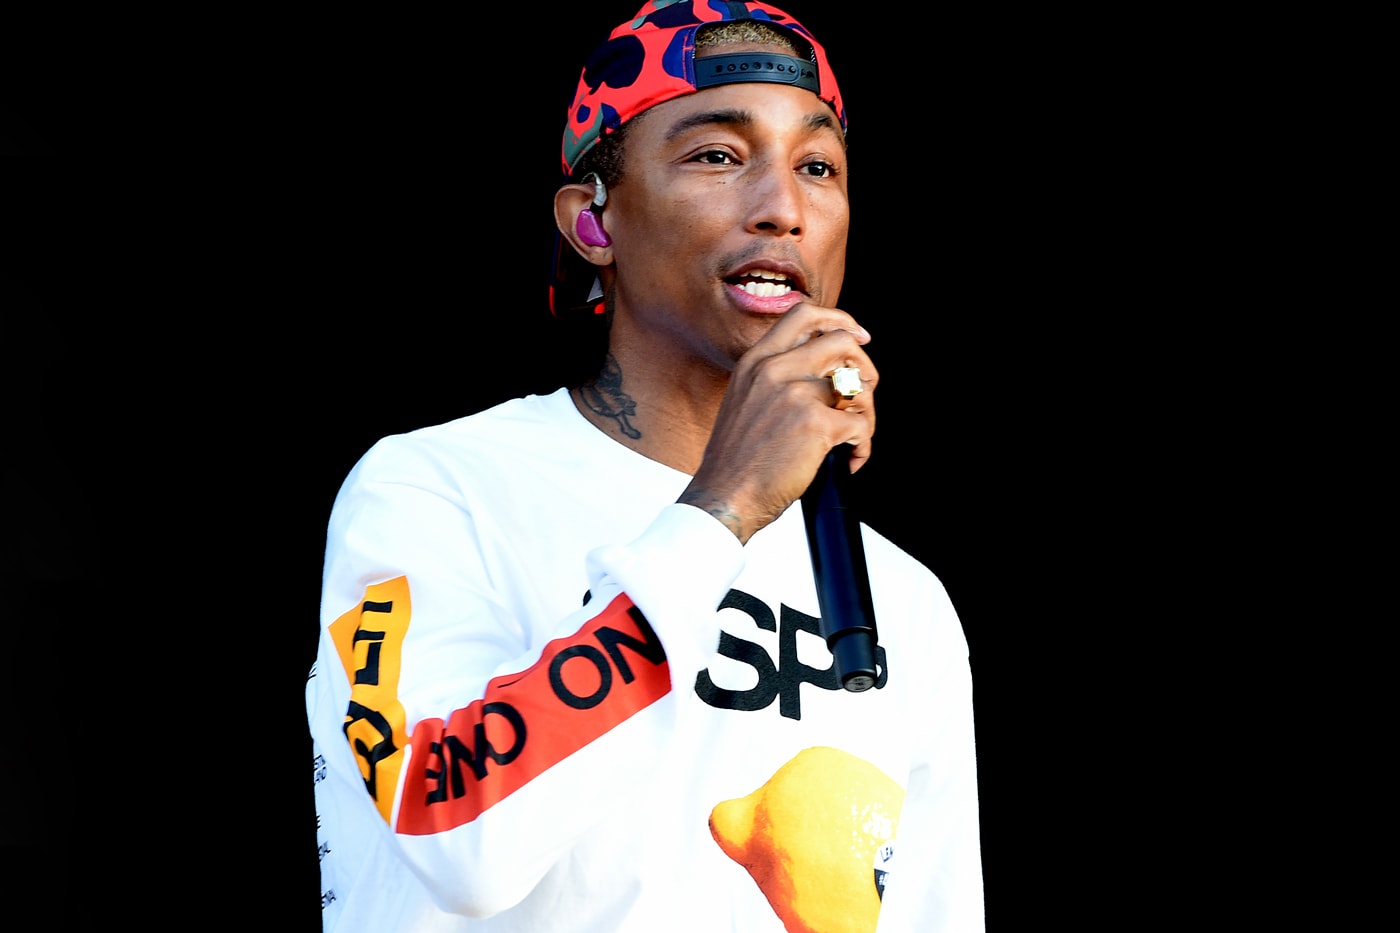 pharrell-responds-to-lawsuit-over-beats-1-show